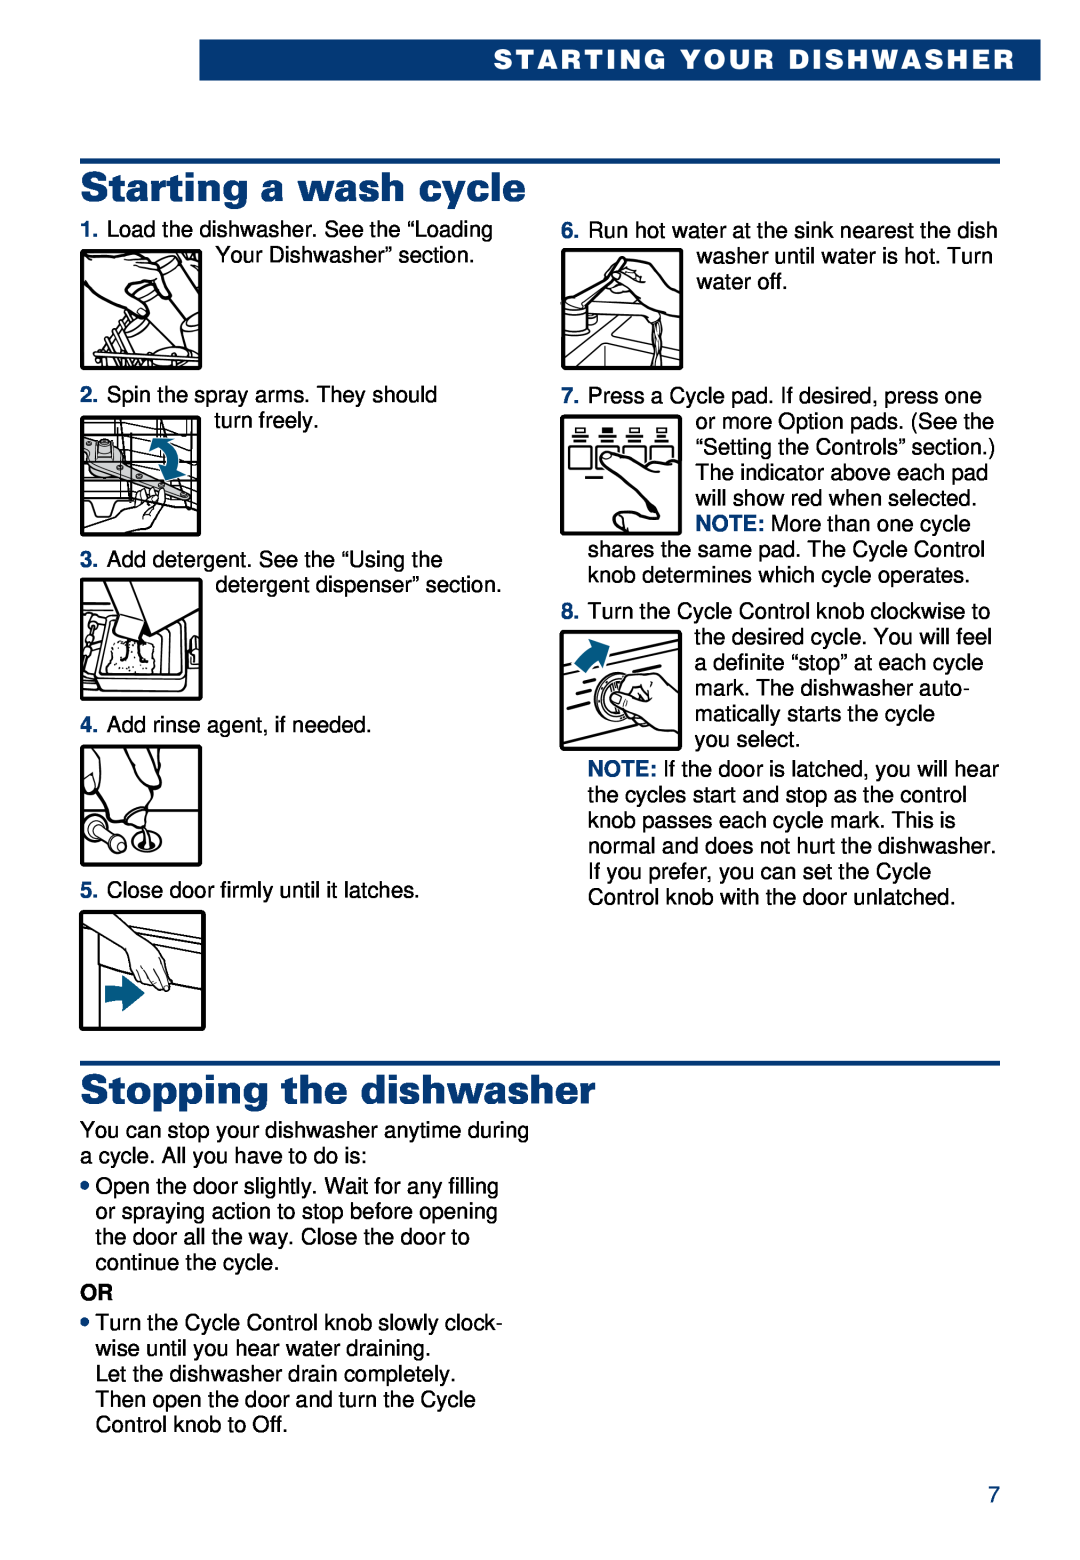 Whirlpool 900 warranty Starting a wash cycle, Stopping the dishwasher, Starting Your Dishwasher 